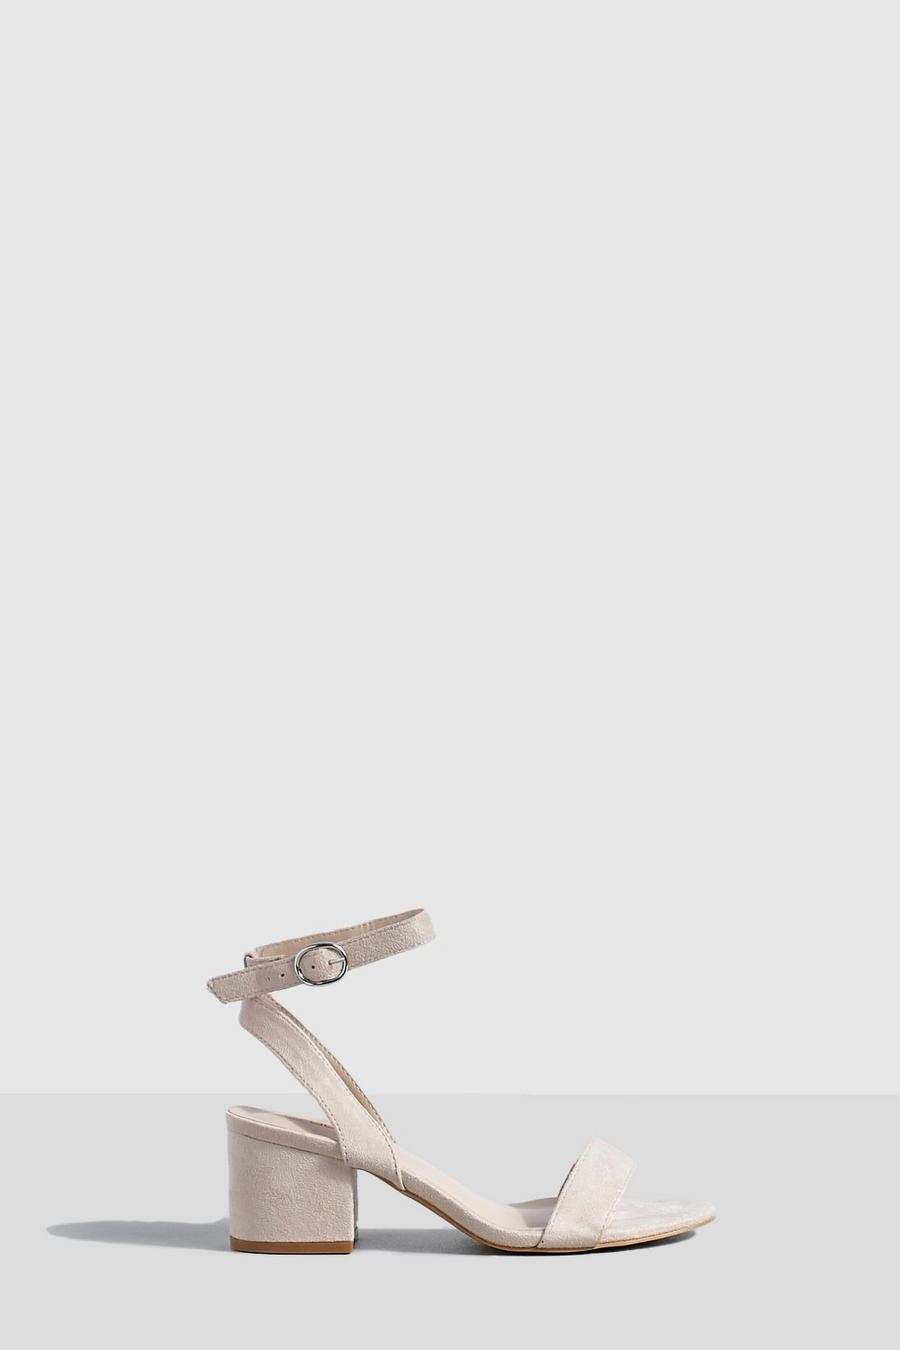 Blush pink Low Block Barely There Heels 